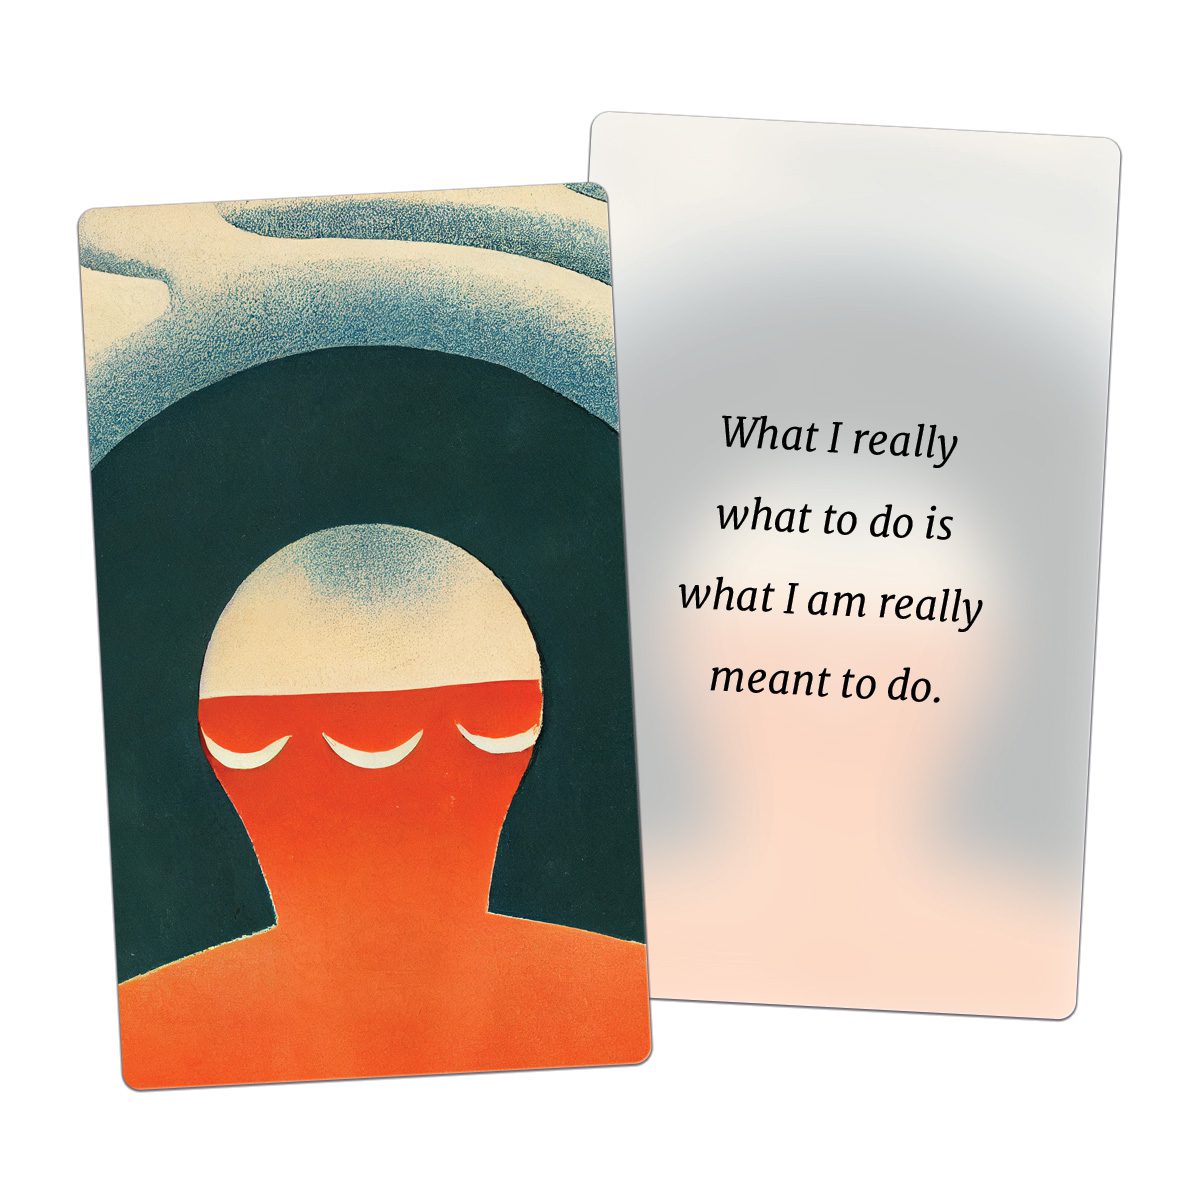 What I really what to do is what I am really meant to do. (AFFIRMATION CARD)